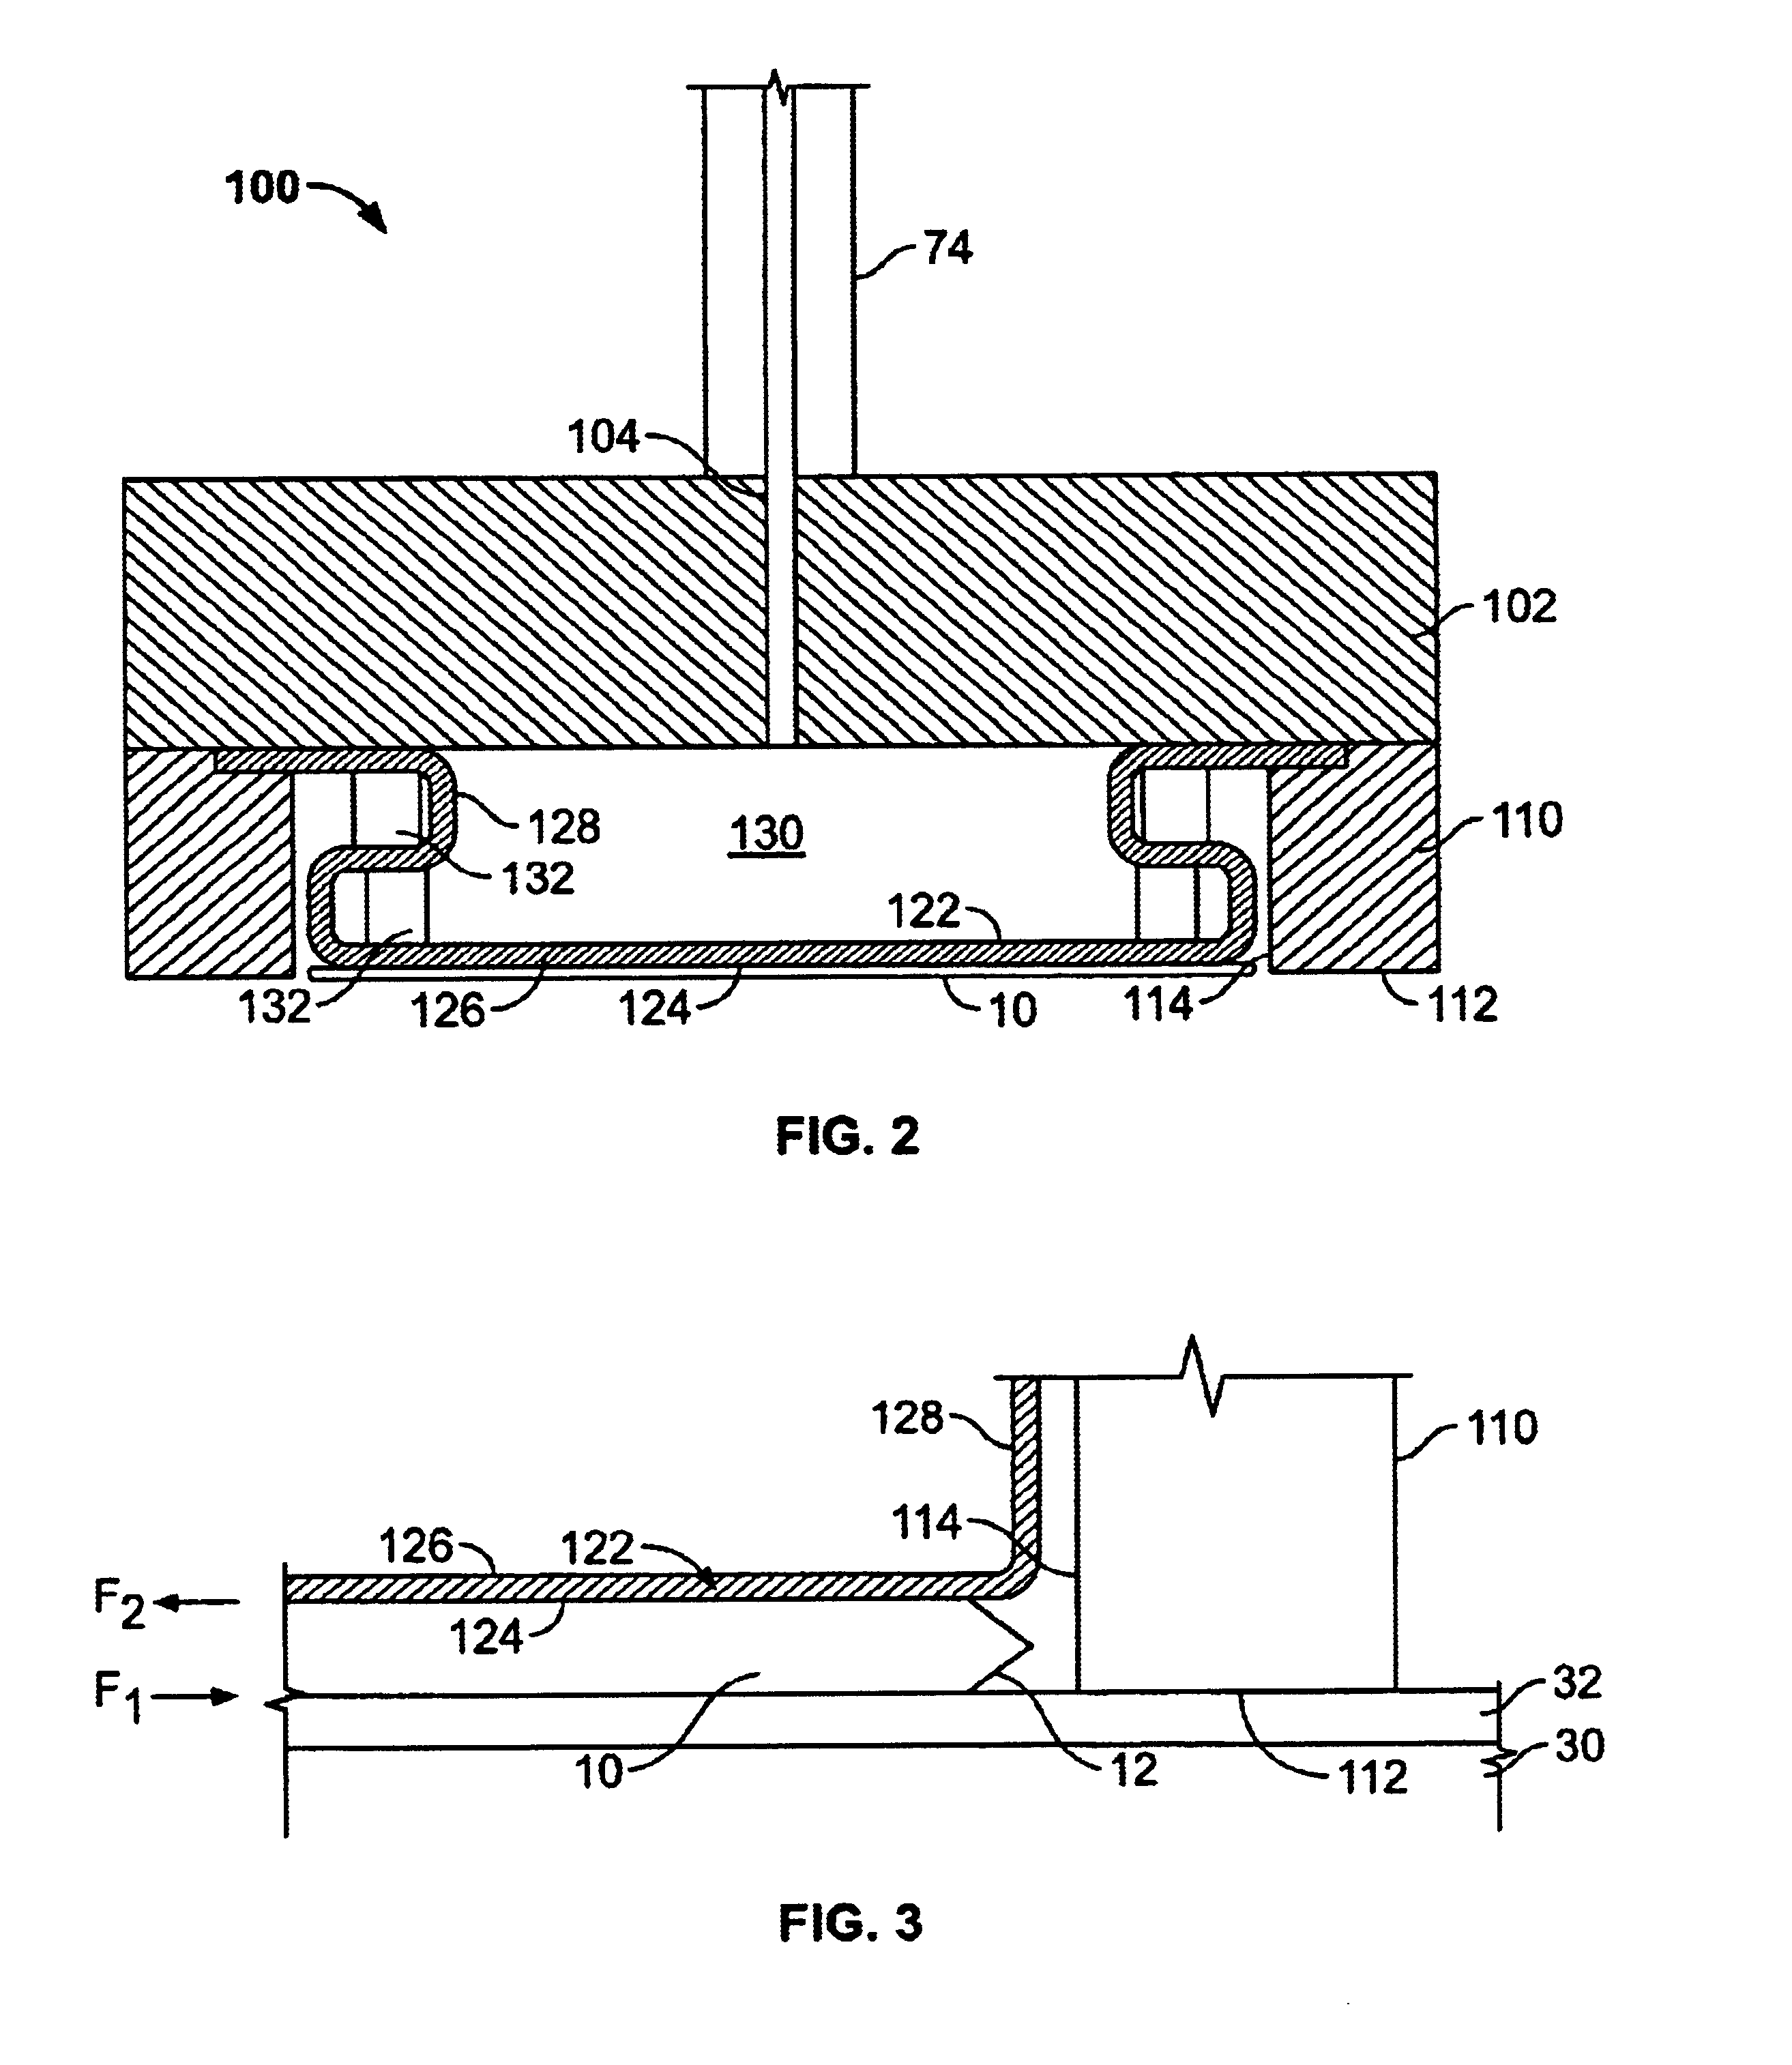 Carrier head with a modified flexible membrane